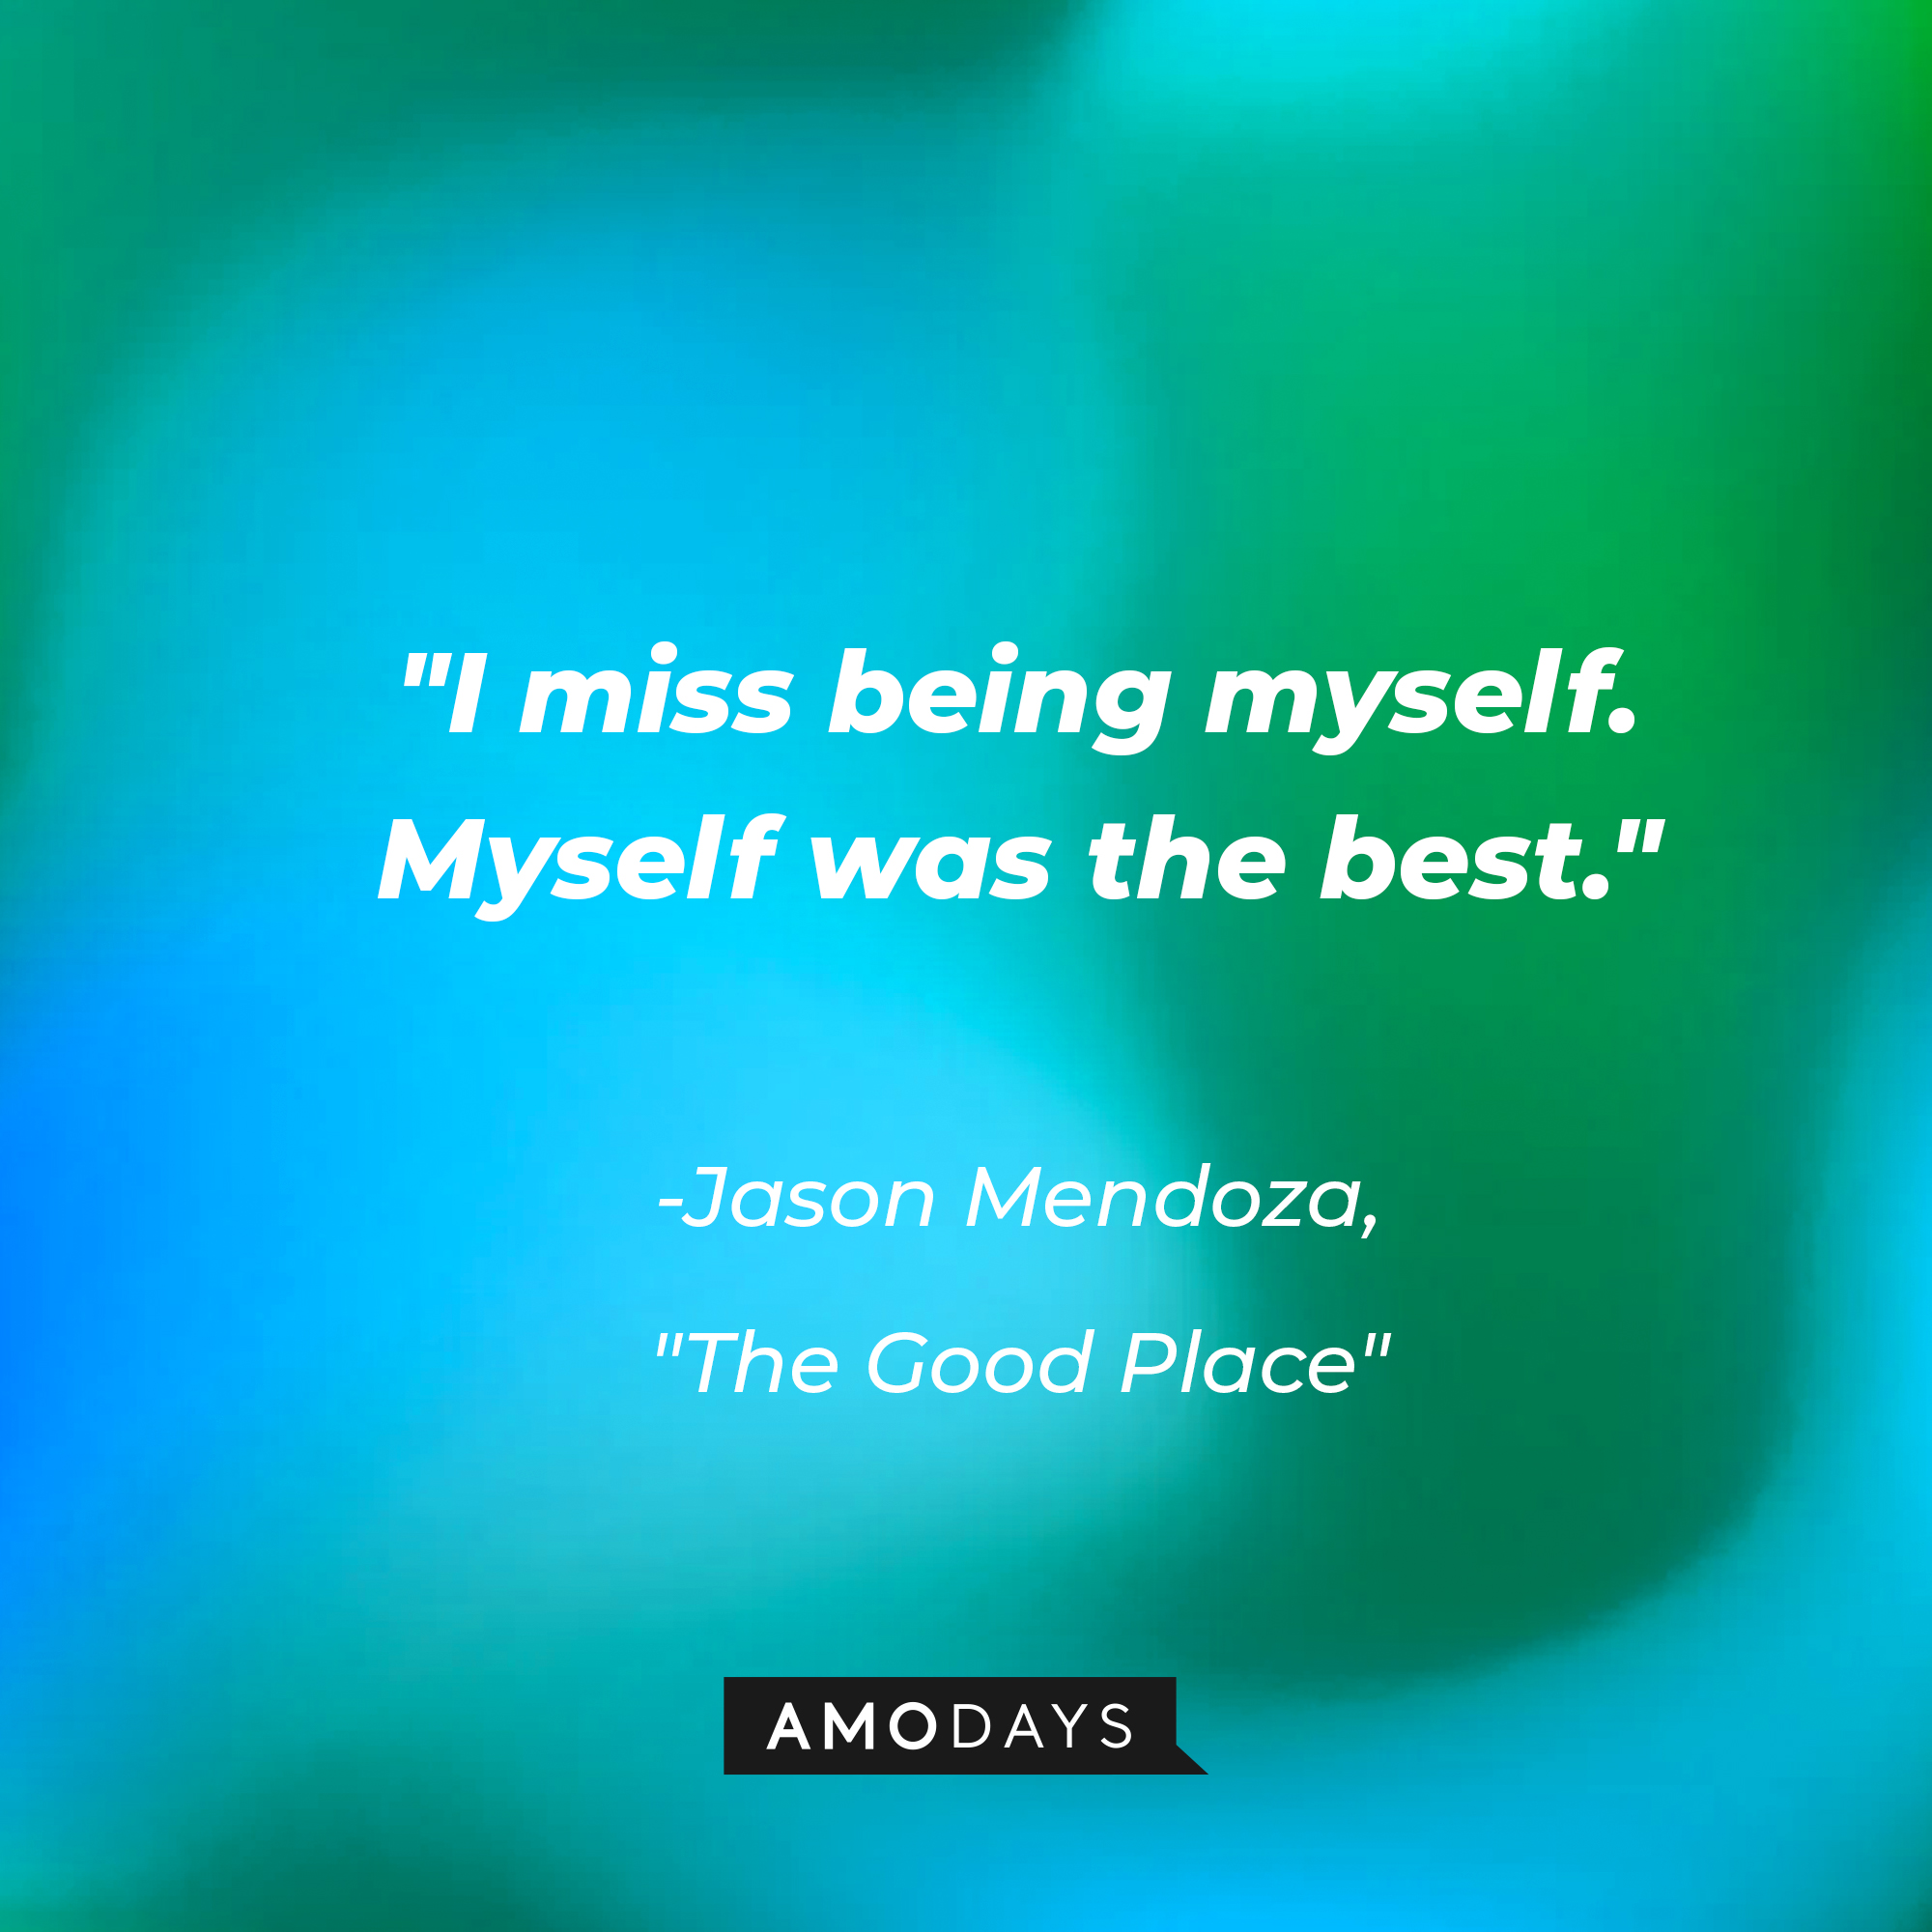 Jason Mendoza's quote in "The Good Place:" “I miss being myself. Myself was the best.” | Source: Amodays